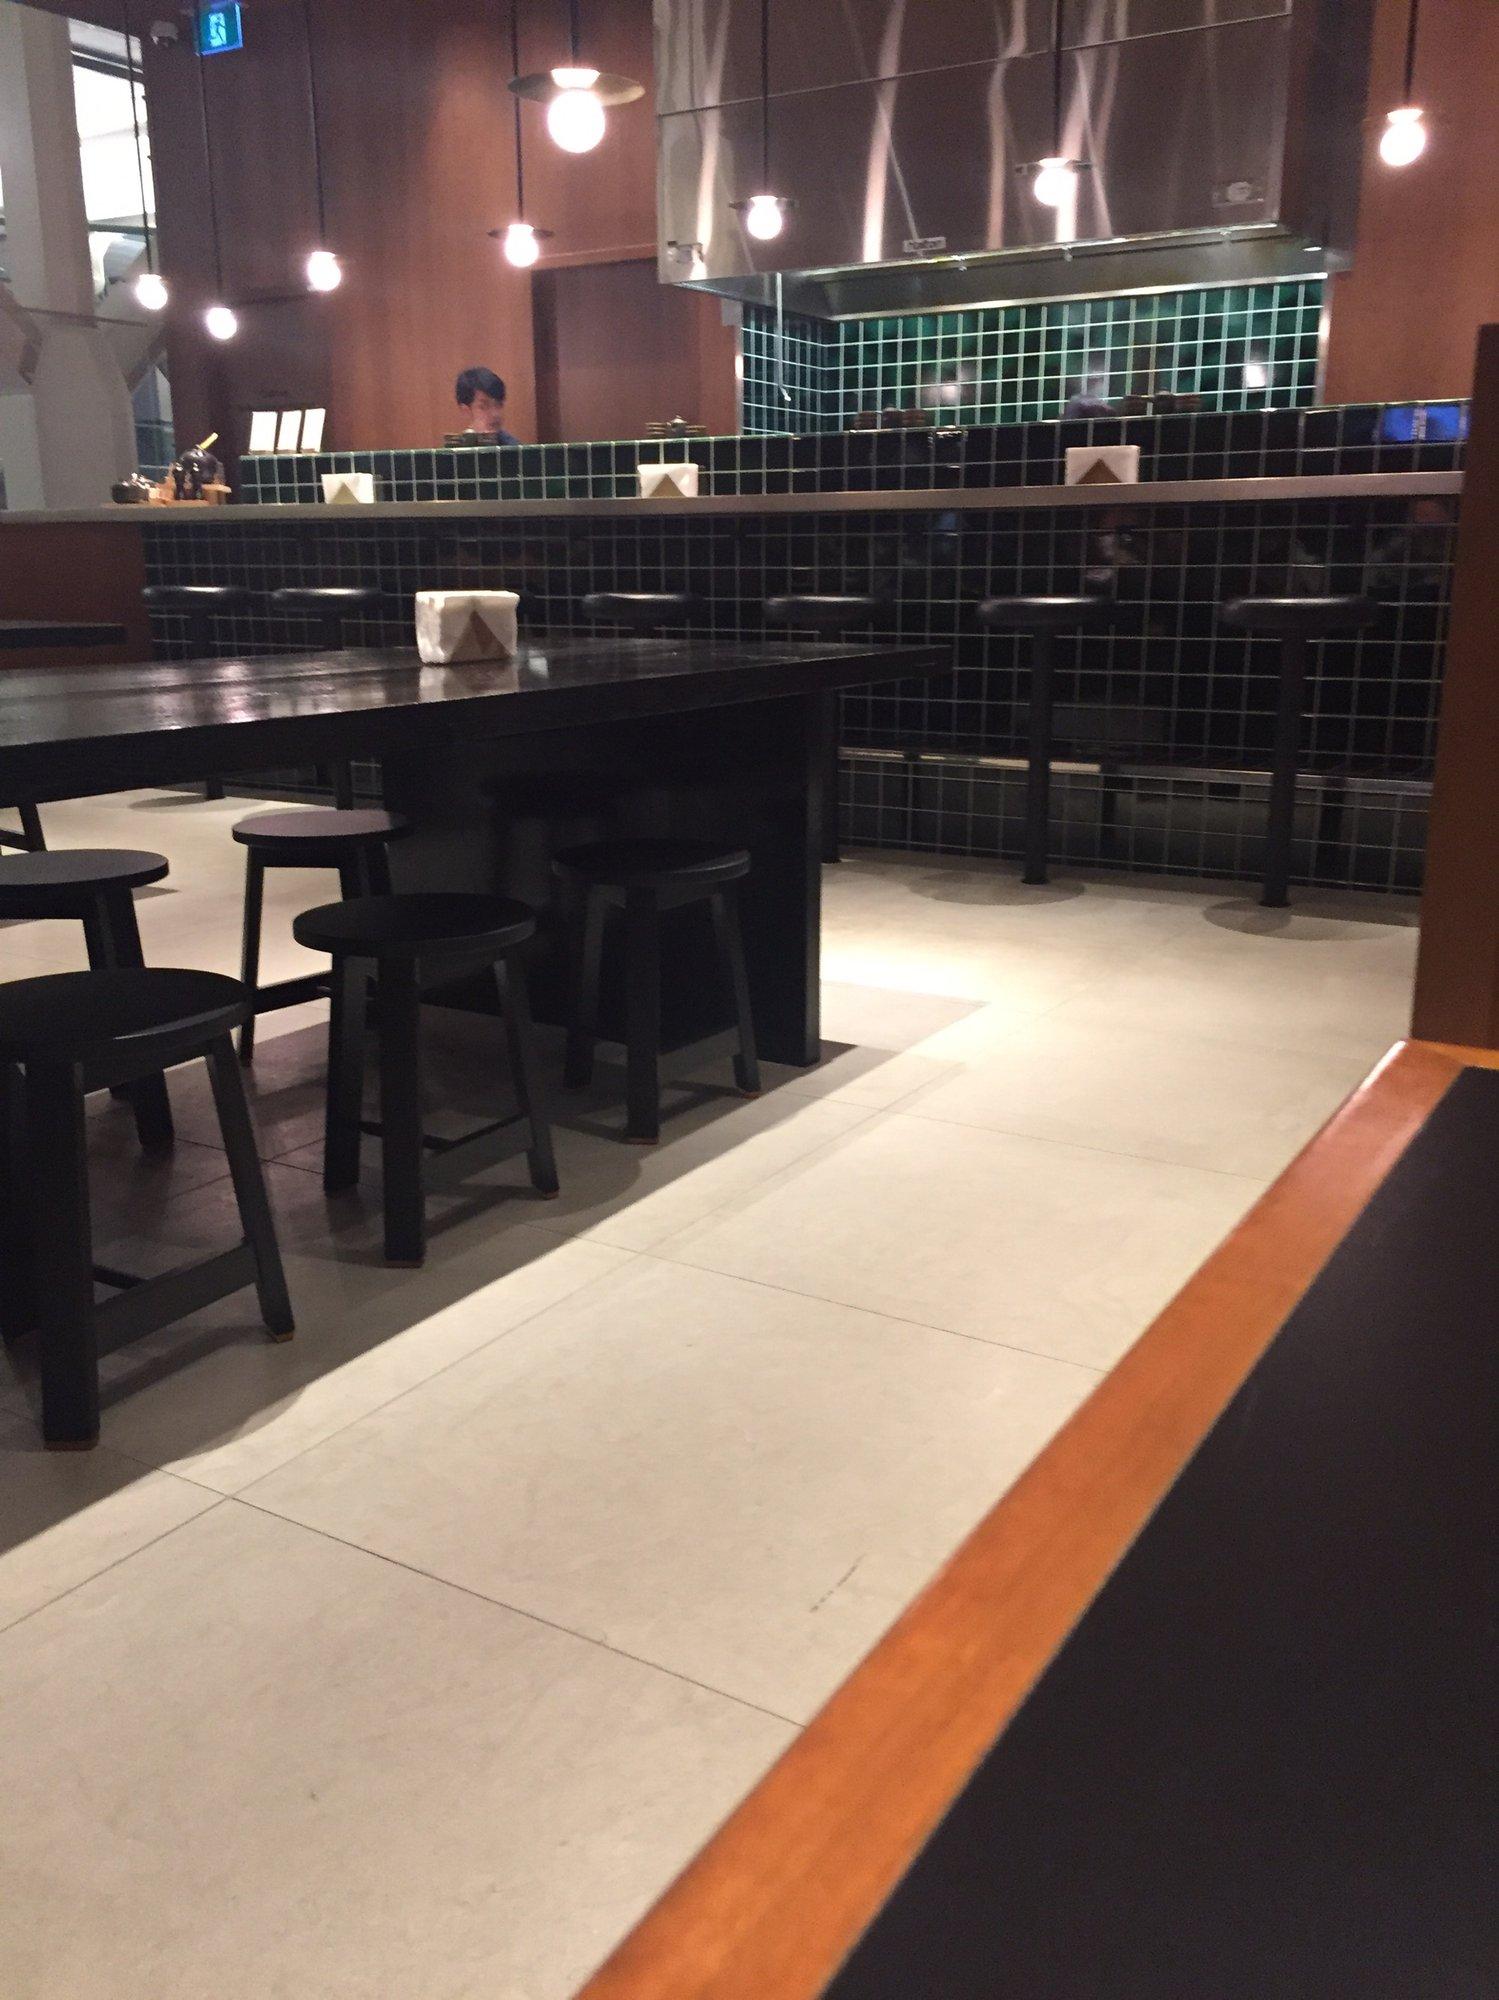 Cathay Pacific First and Business Class Lounge image 11 of 11